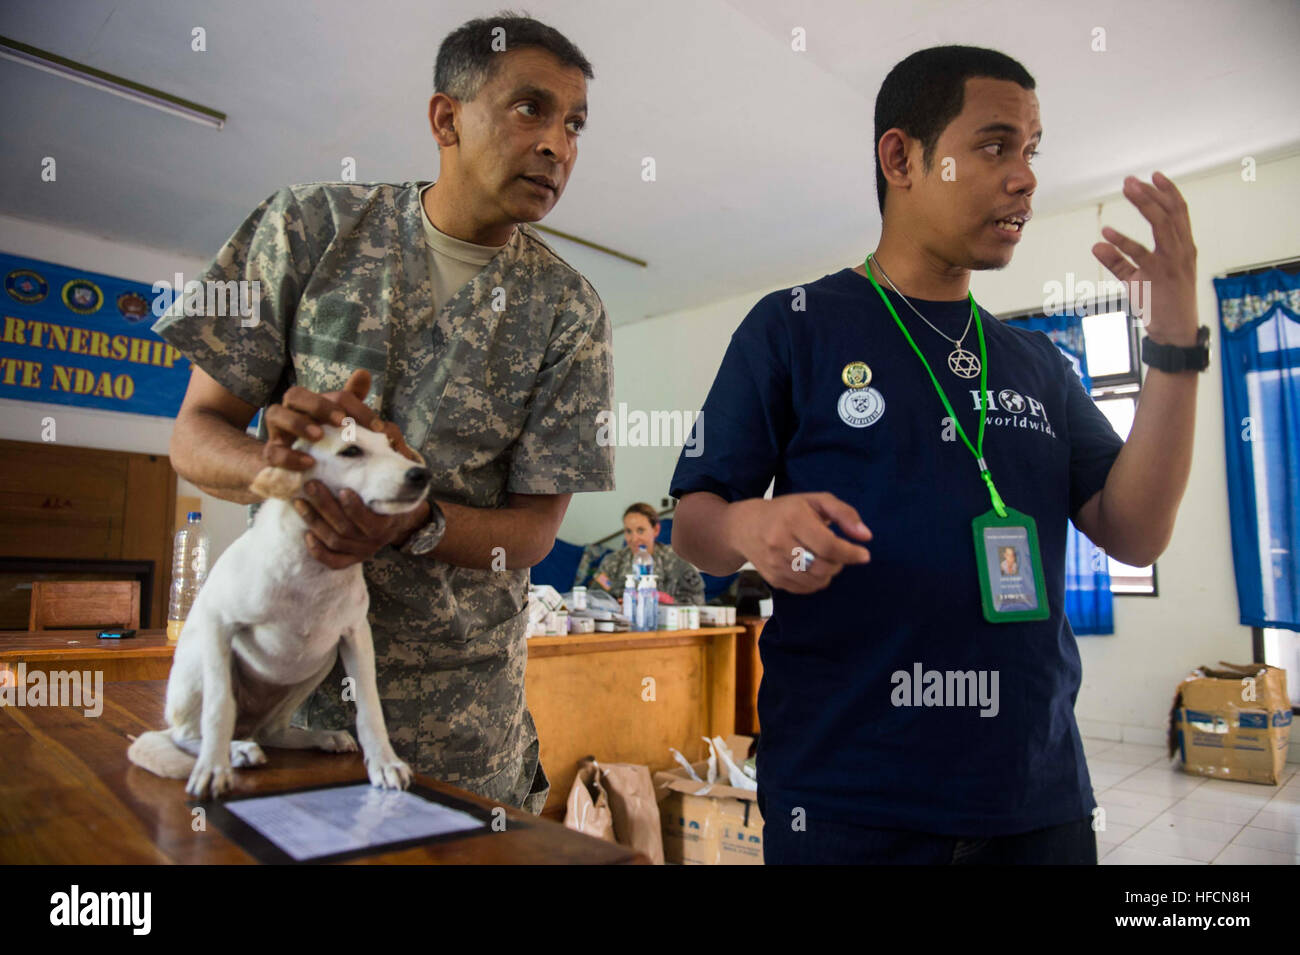 140602-N-IL267-101 BA'A, Indonesia (June 2, 2014) U.S. Army Maj. Raghavan Sampathkumaran, a veterinarian from Lompoc, Calif., assigned to the 109th Medical Detachment Veterinary Services, peforms a pre-surgery physical examination on a dog while Jack Loloin, a volunteer interpreter from Hope Worldwide, translates for Indonesian animal doctors and veterinarian medics as part of a veterinarian subject matter expert exchange at Dinas Peternakan Rote Ndao veterinarian clinic in Ba'a, Indonesia, during Pacific Partnership 2014. Pacific Partnership is in its ninth iteration and is the largest annual Stock Photo